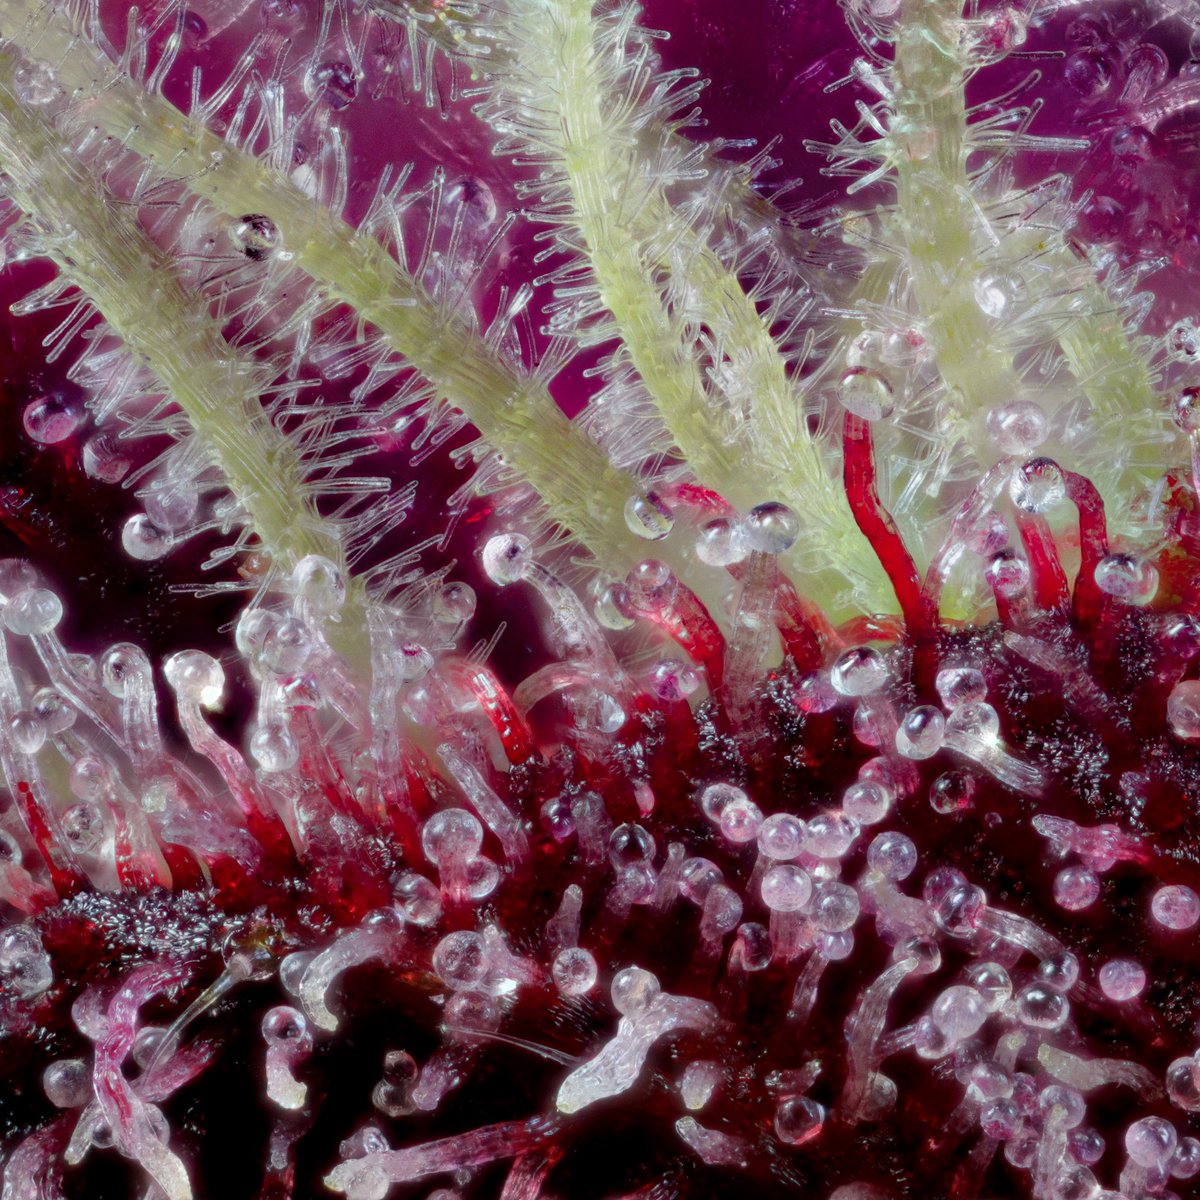 Why weed is purple, the view of anthocyanin in marijuana trichomes